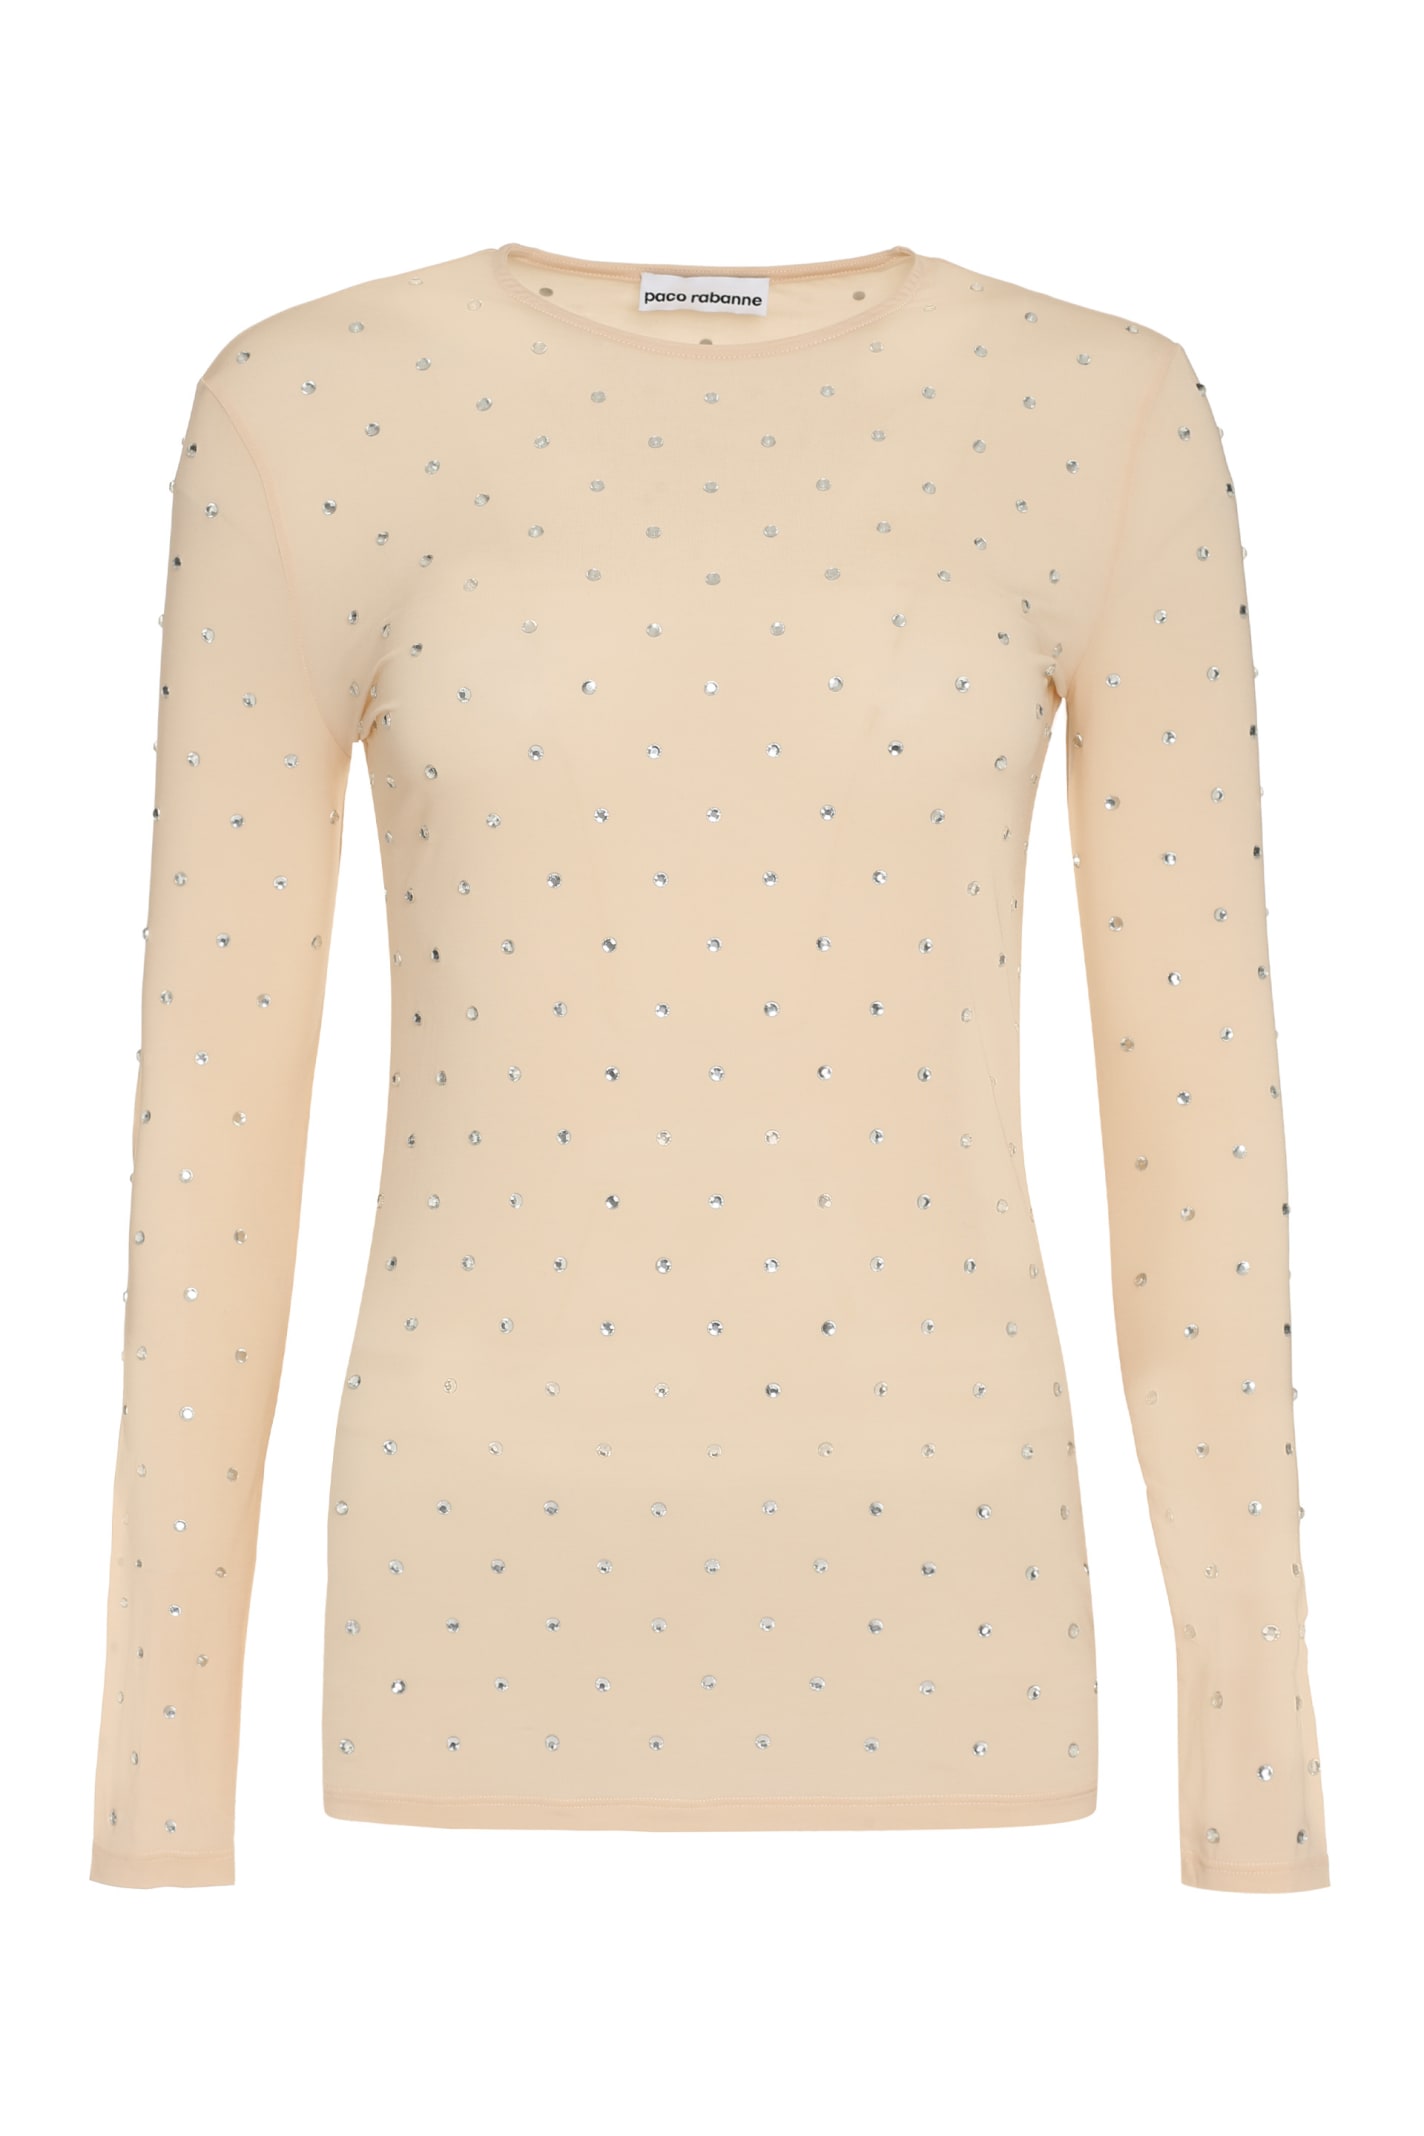 Paco Rabanne Jersey Top In Skin